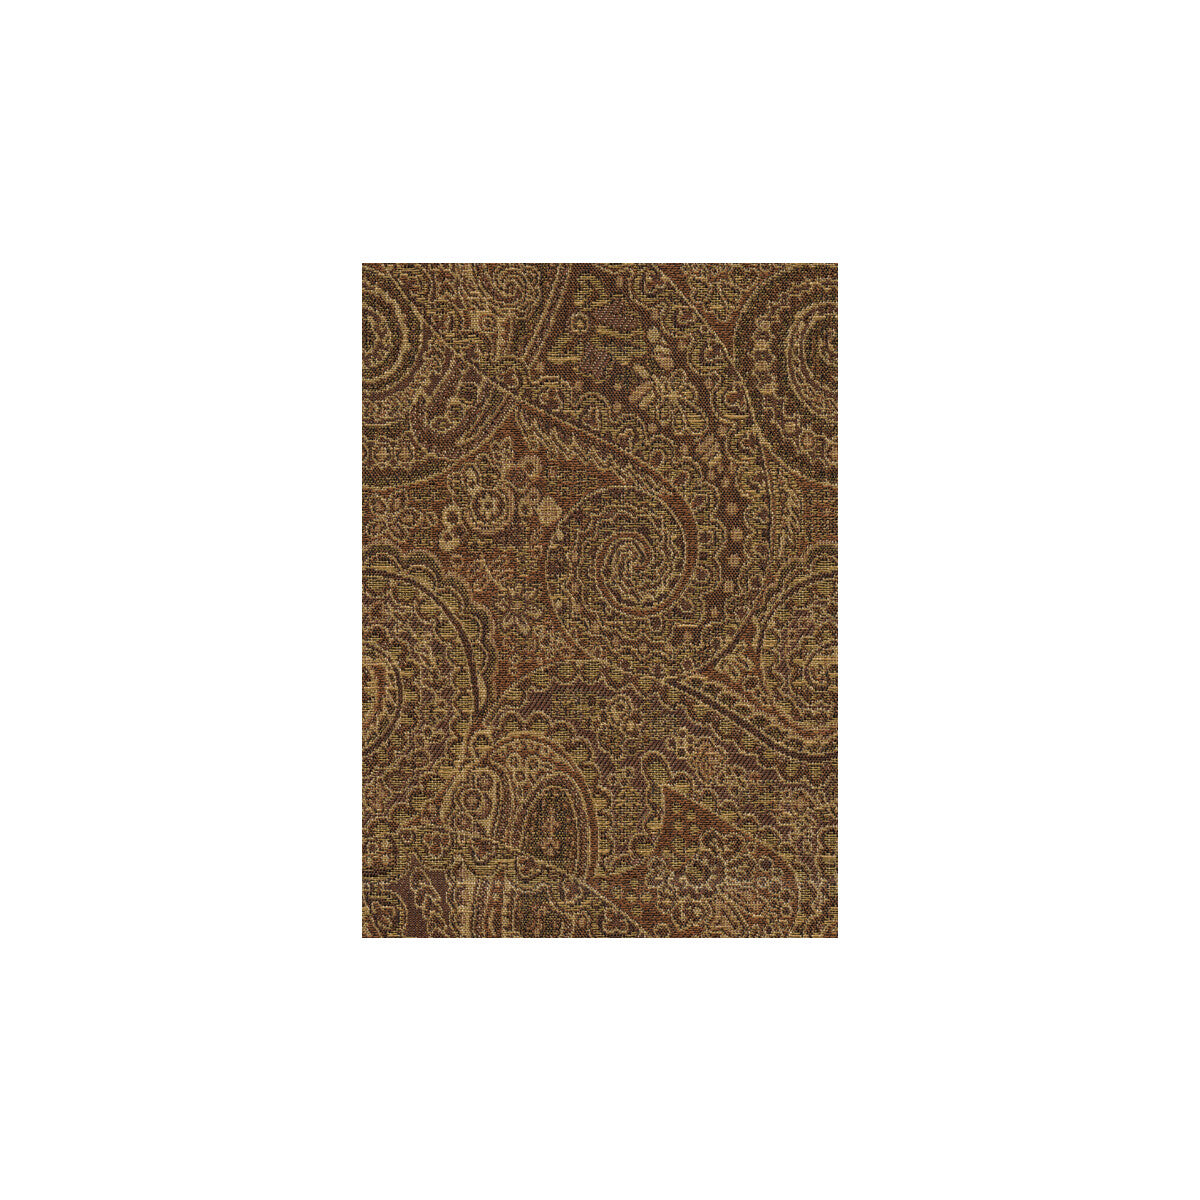 Kasan fabric in java color - pattern 31524.6.0 - by Kravet Contract in the Gis Crypton collection